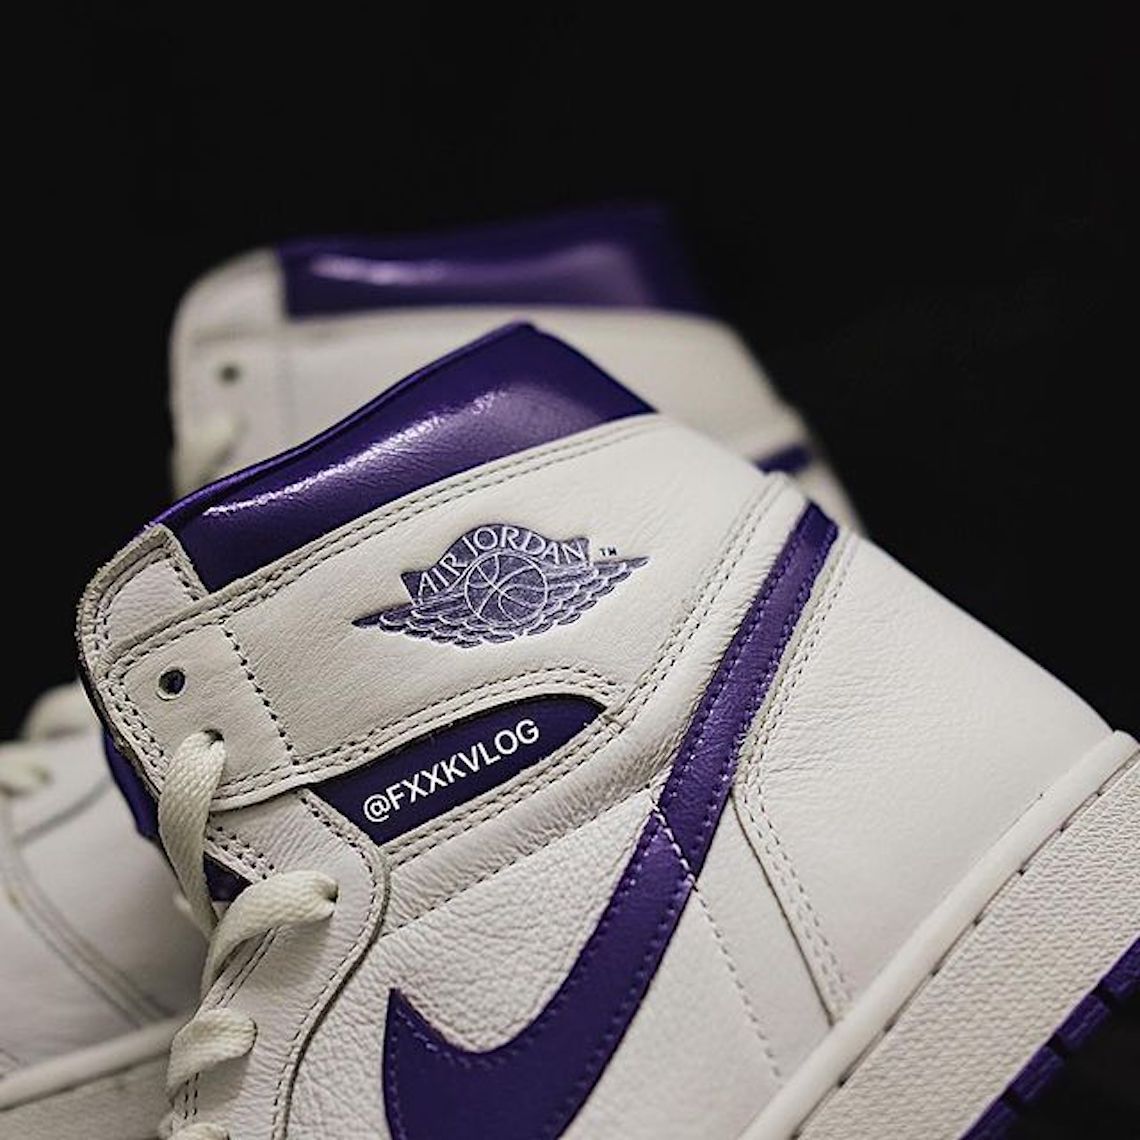 Synthetic leather strap with Jordan branding Retro High Og Wmns White Court Purple Cd0461 151 20